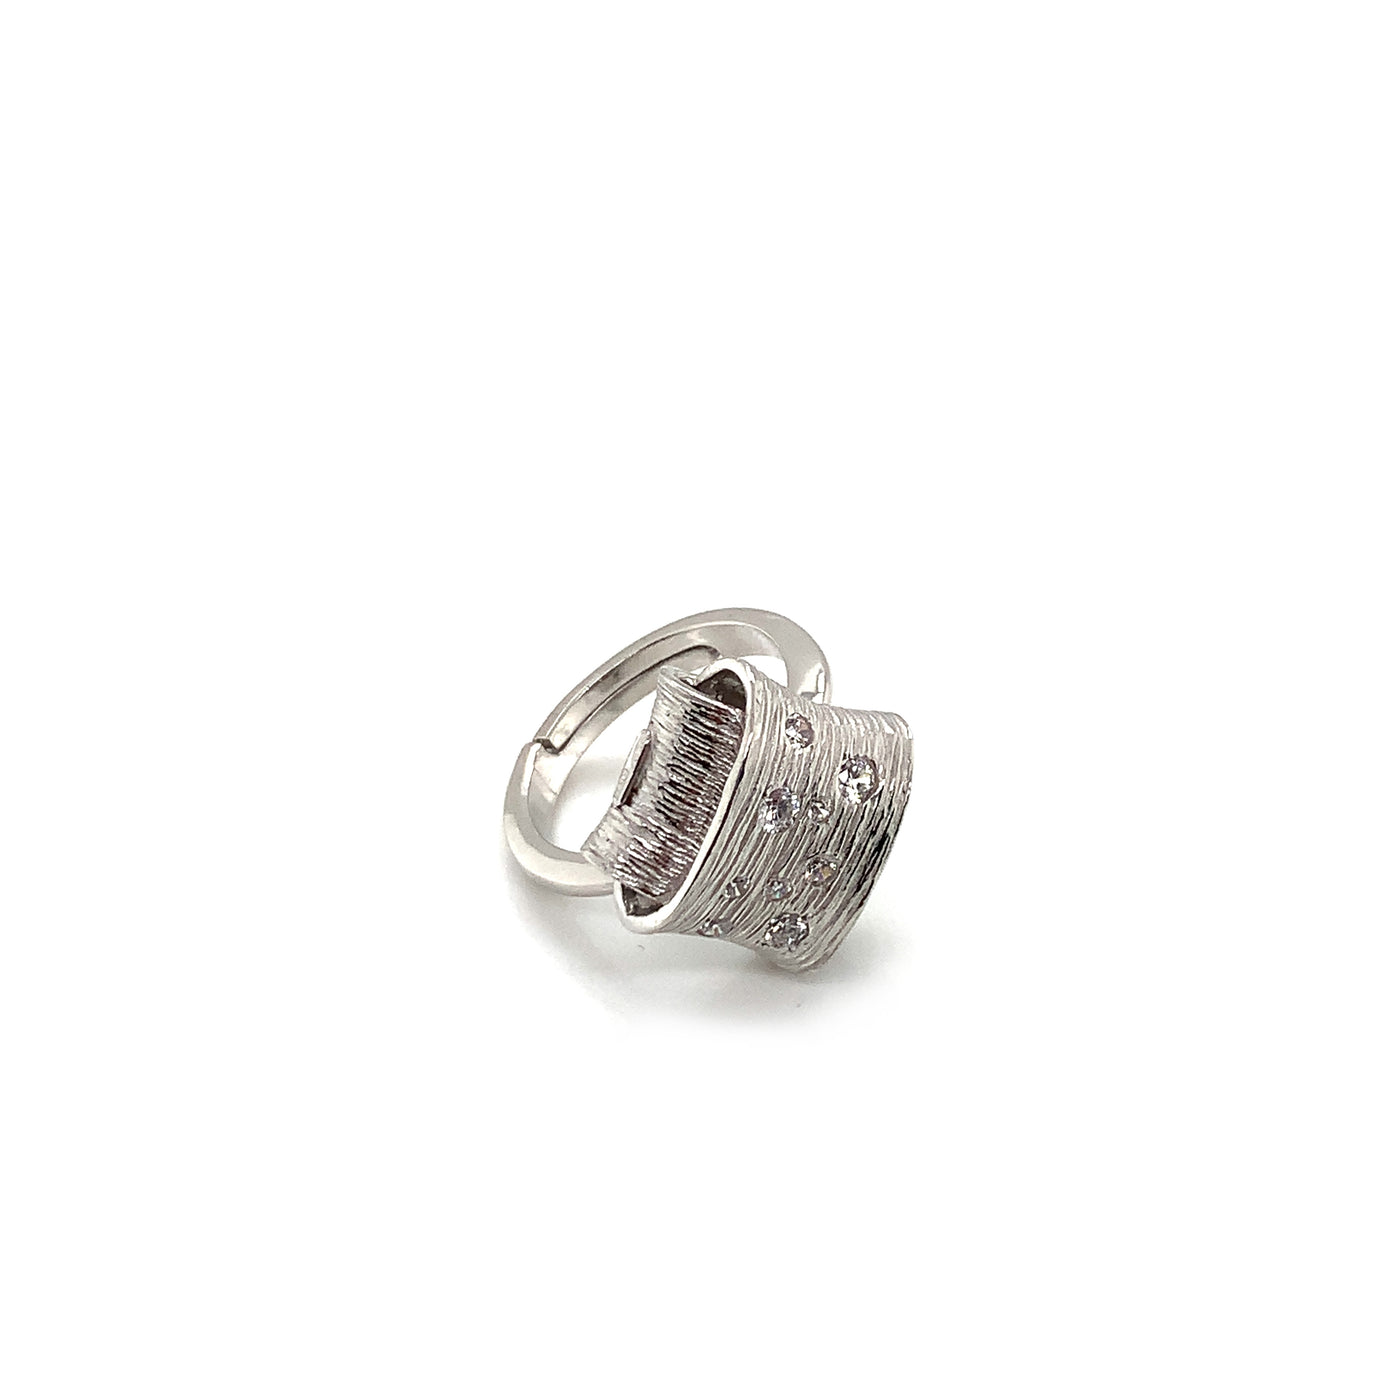 IL Diletto - Silver Ring, Folded Square, Cubic Zirconia, Size 6, Open Shank, Rhodium Plated